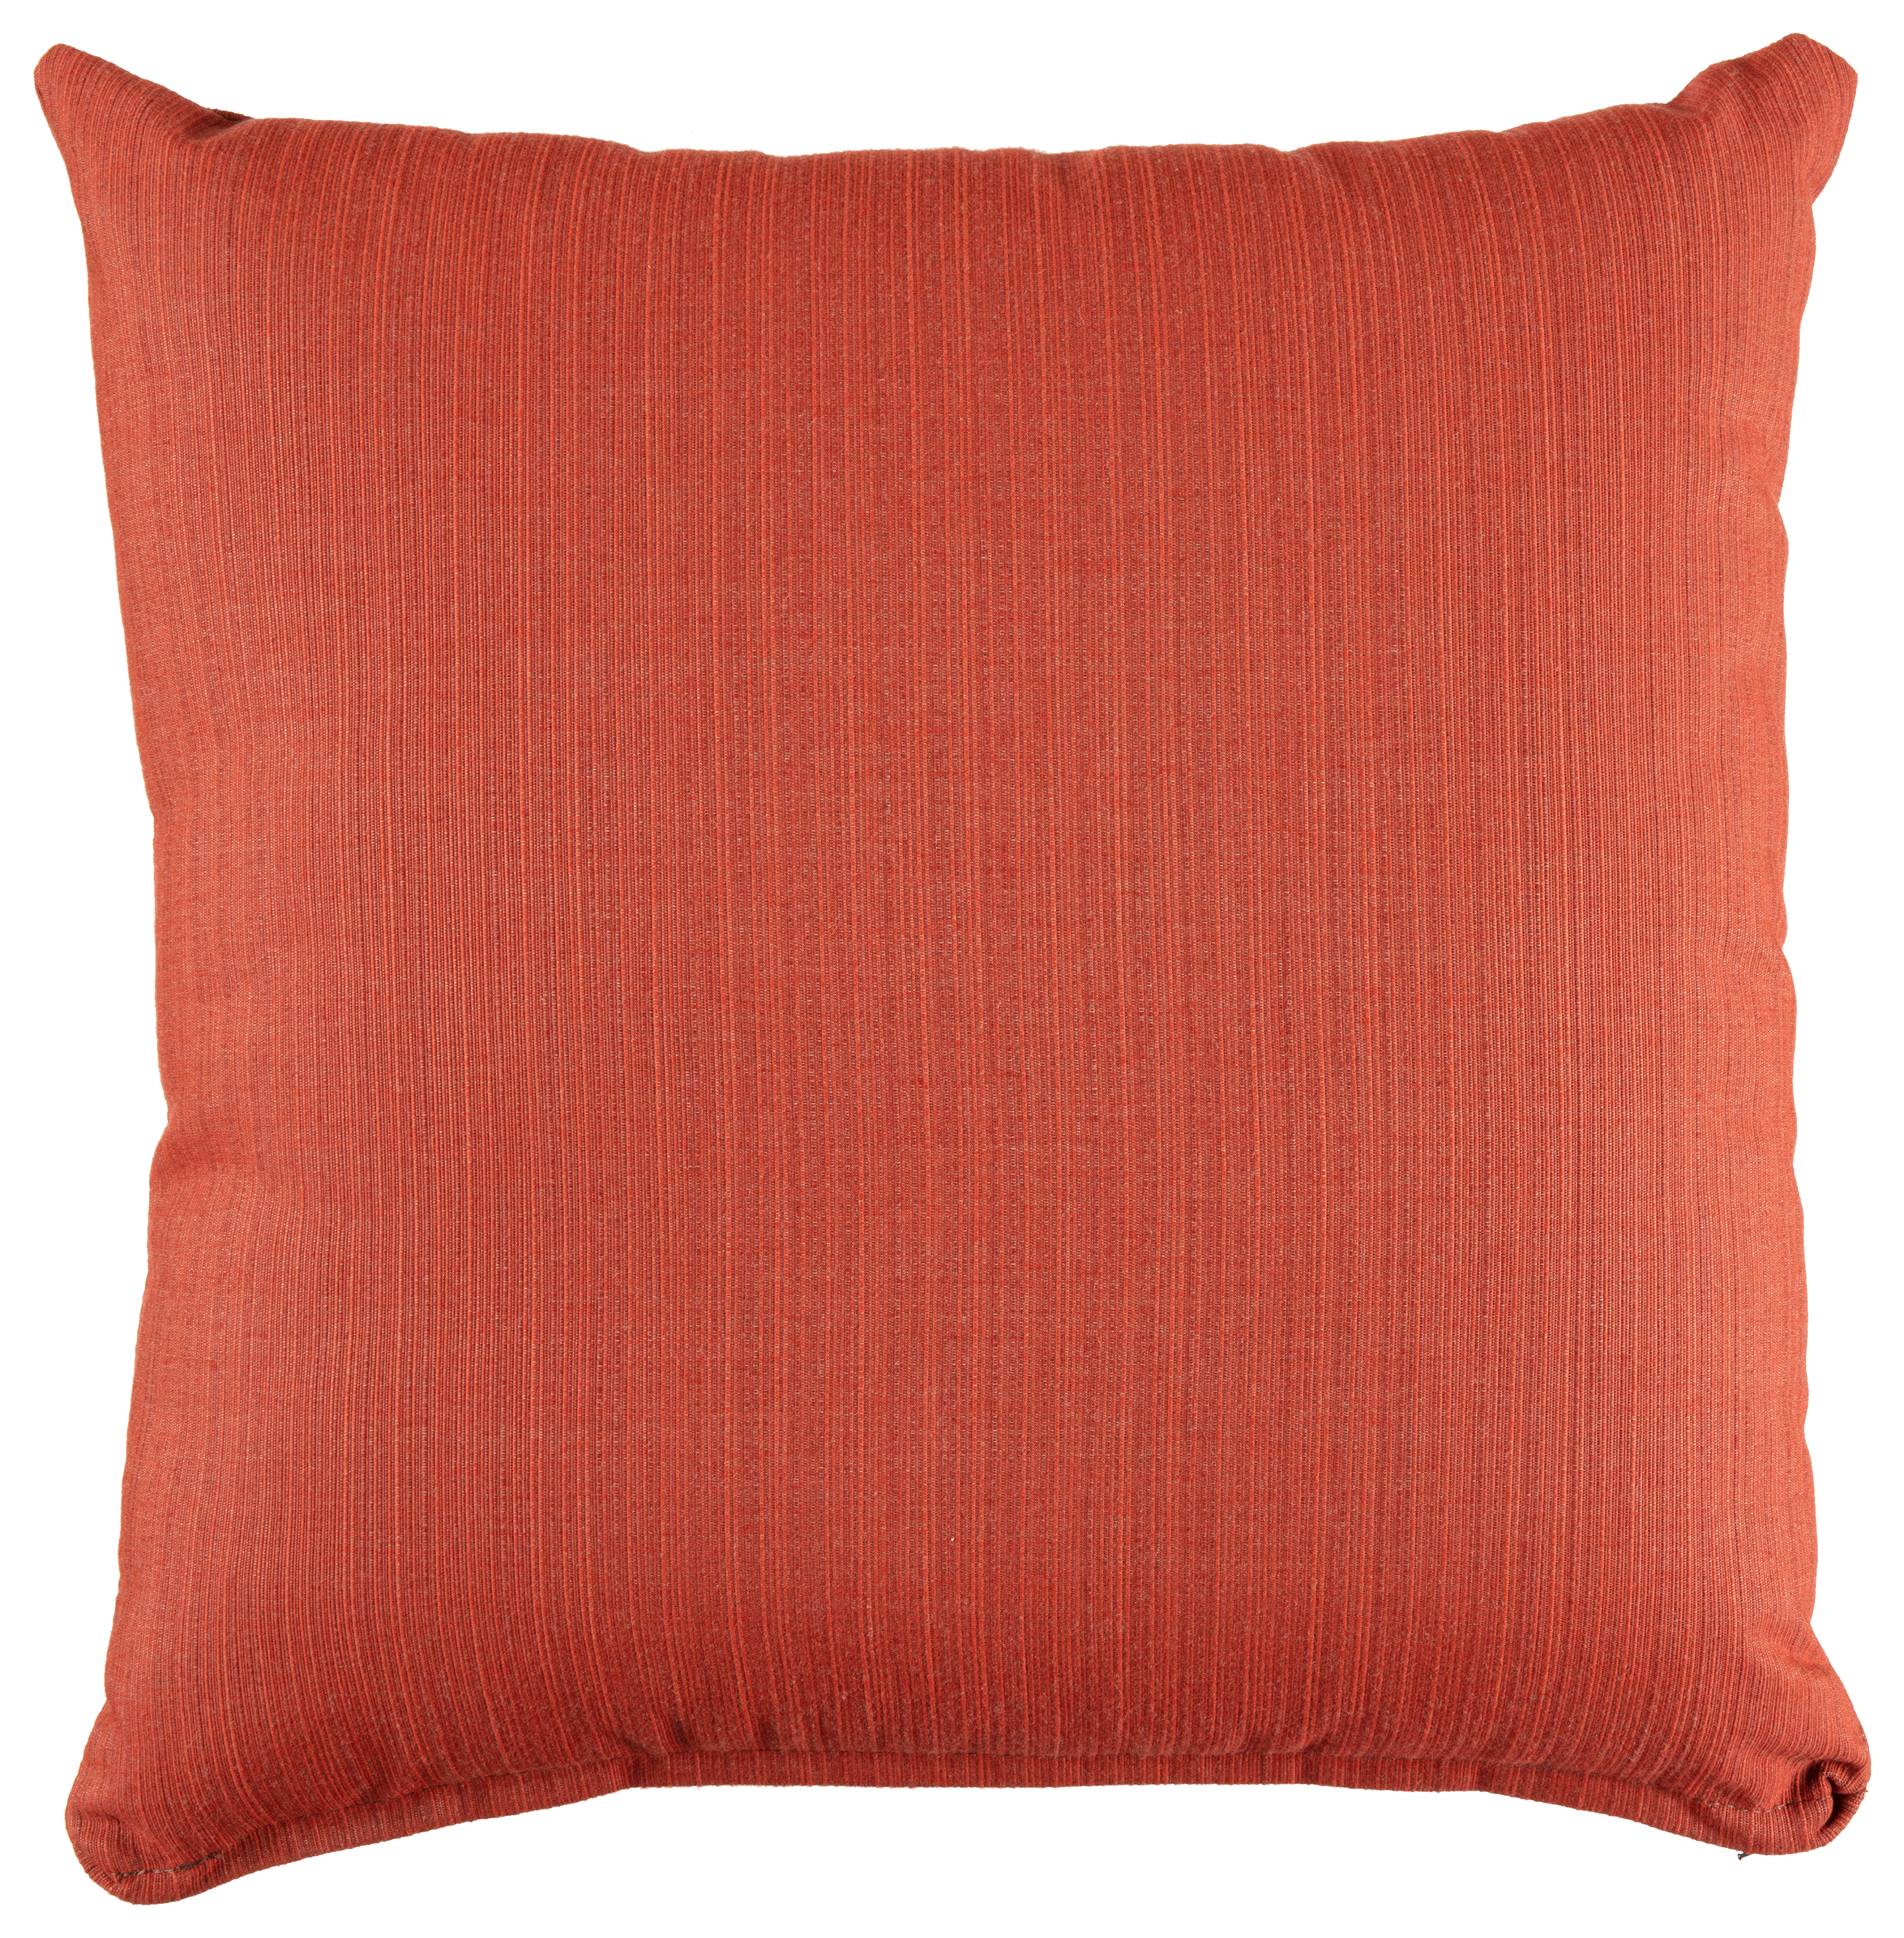 Old Hickory Furniture Dupione-Henna Decorative Pillow